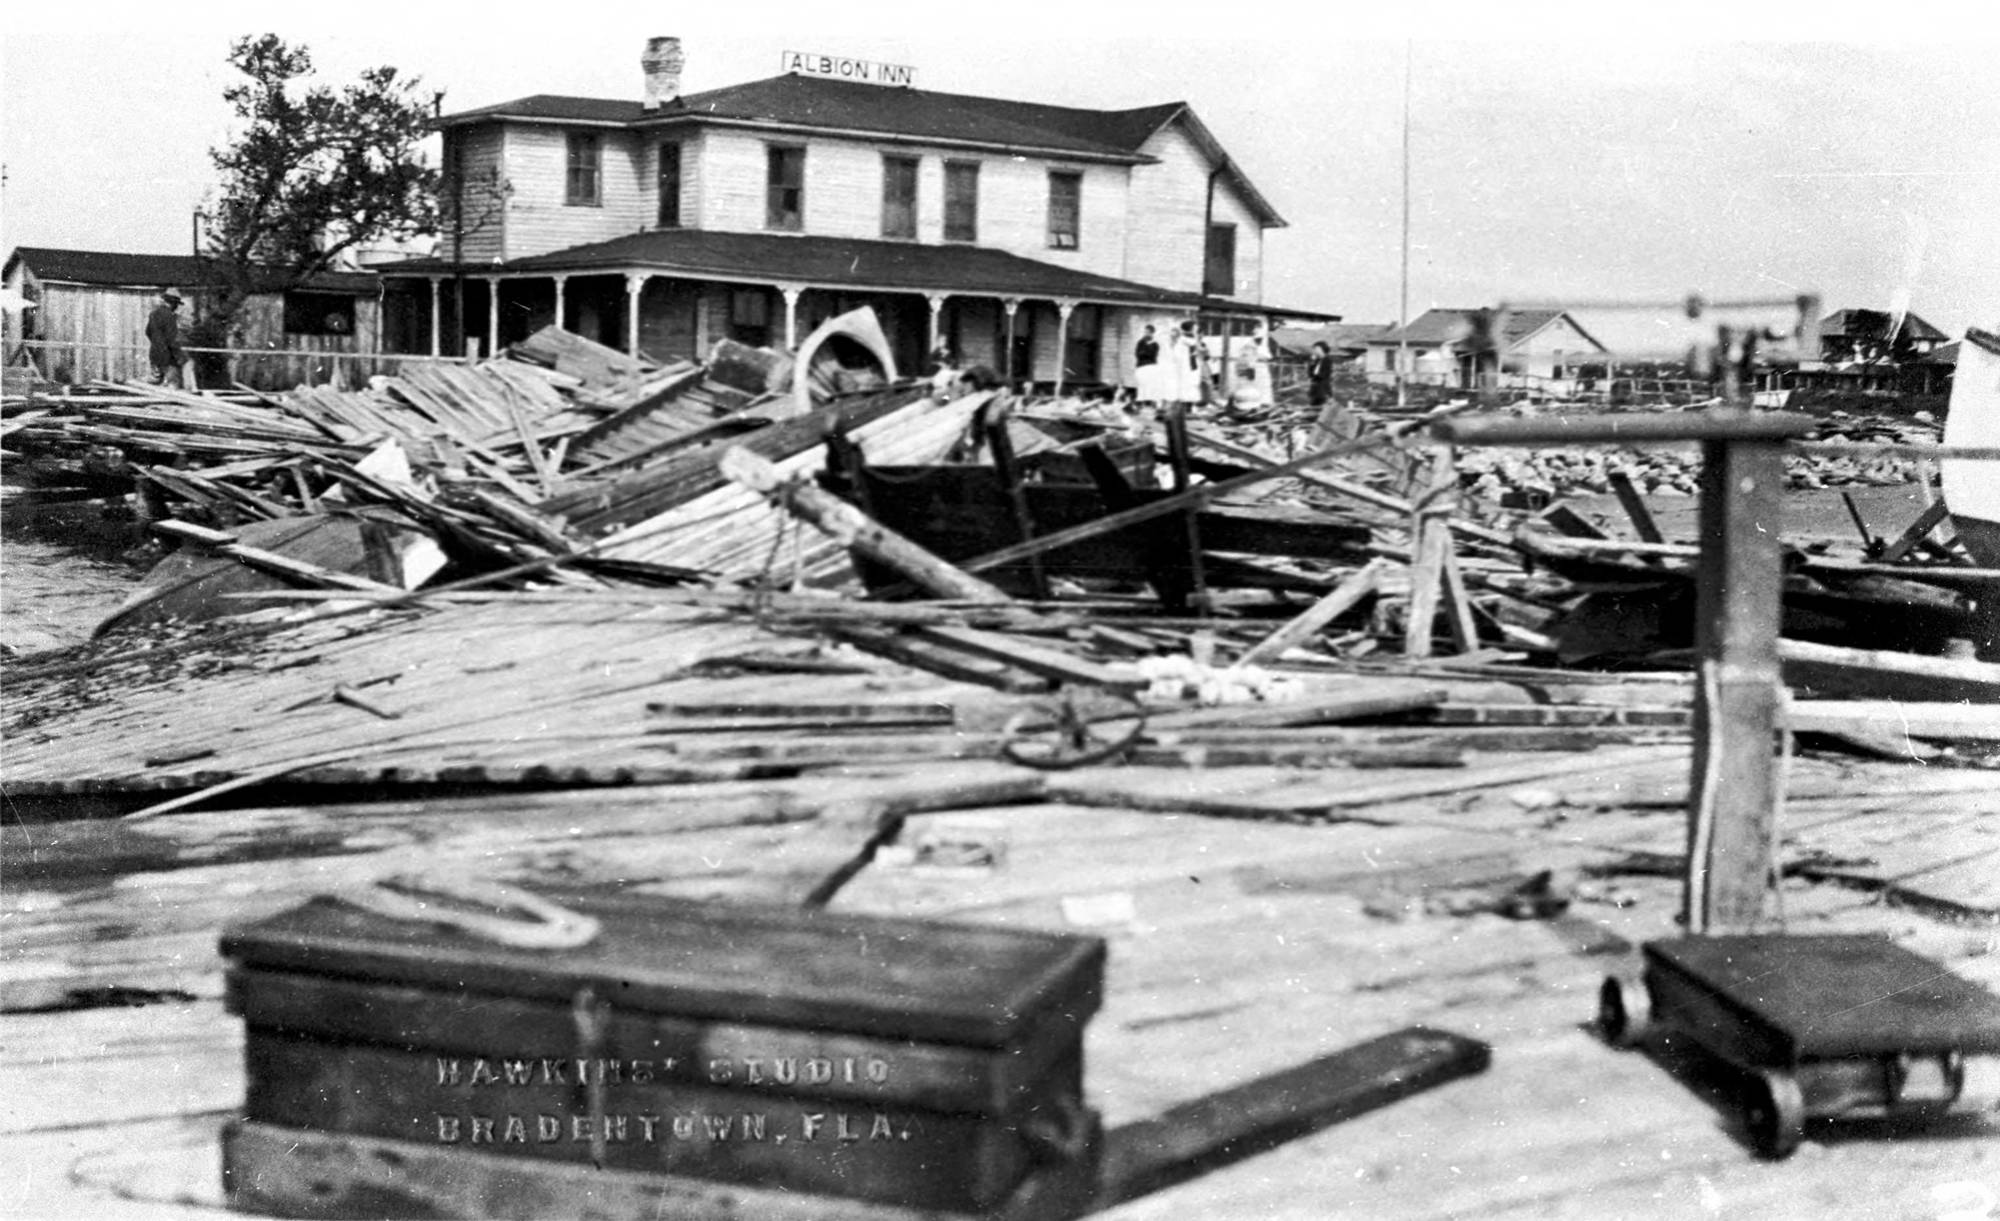 Albion Inn, a hotel and store, was the only building in Cortez besides the museum that survived the hurricane of 1921. The unnamed Category 3 storm ravaged the coast with 100 mph winds.